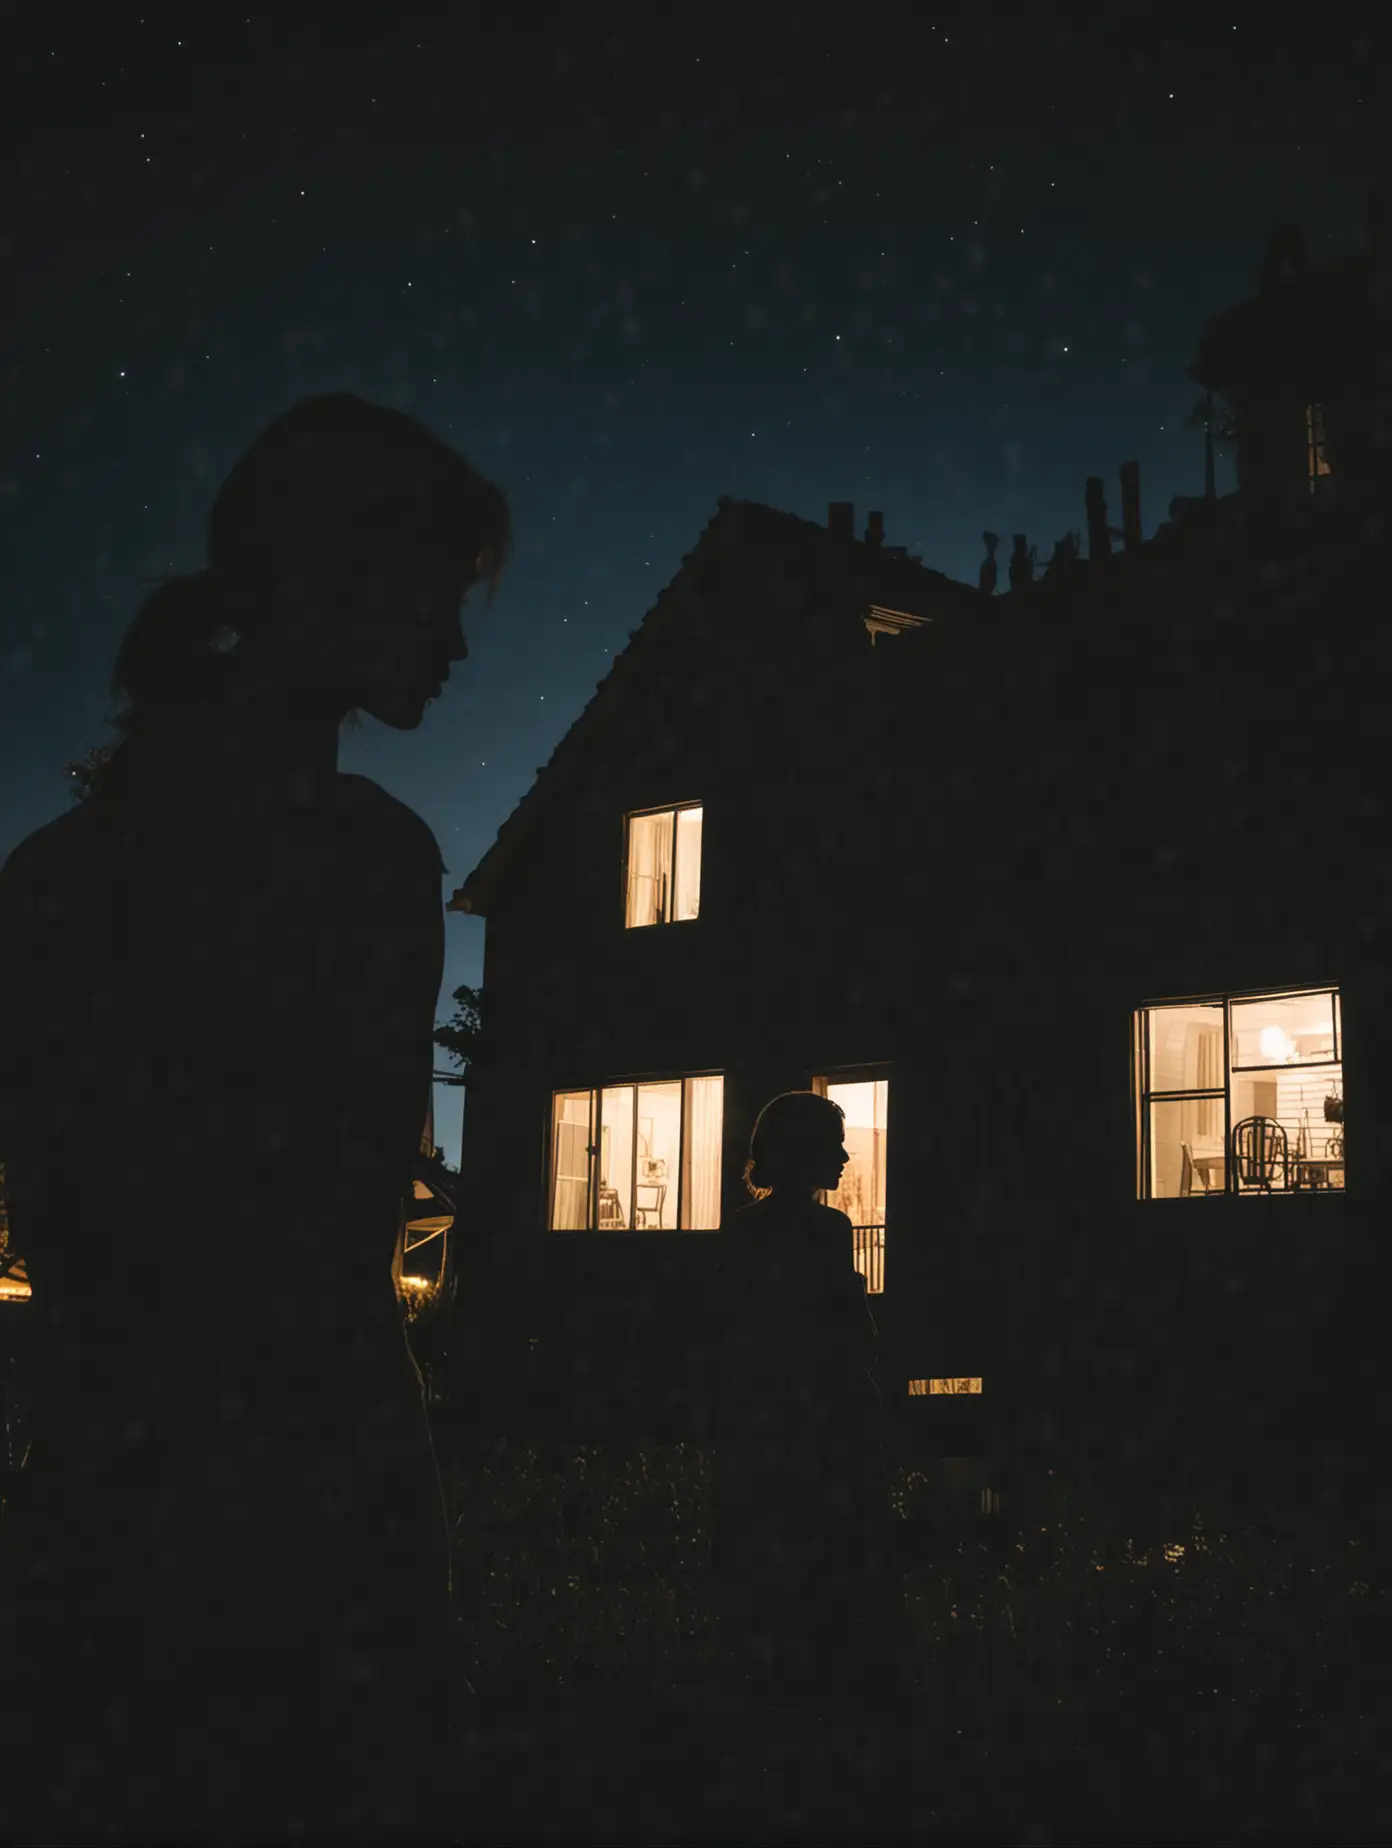 A silhouette of a woman looking at a silhouette of a house at night